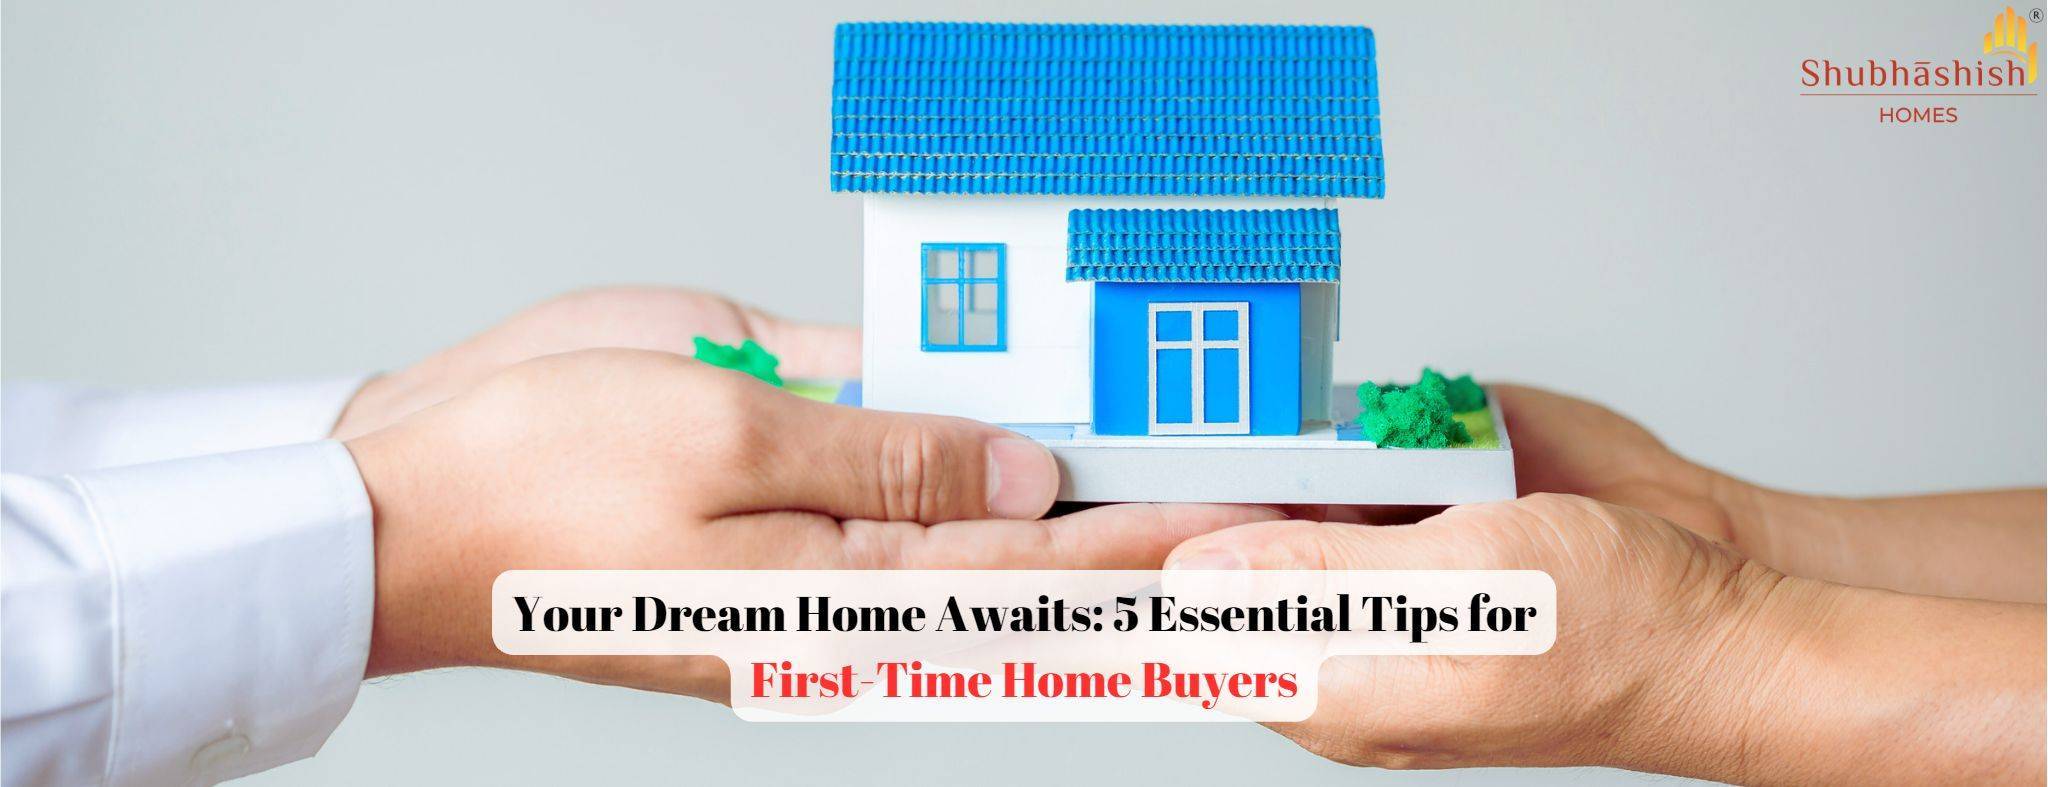 Your Dream Home Awaits: 5 Essential Tips for First-Time Home Buyers